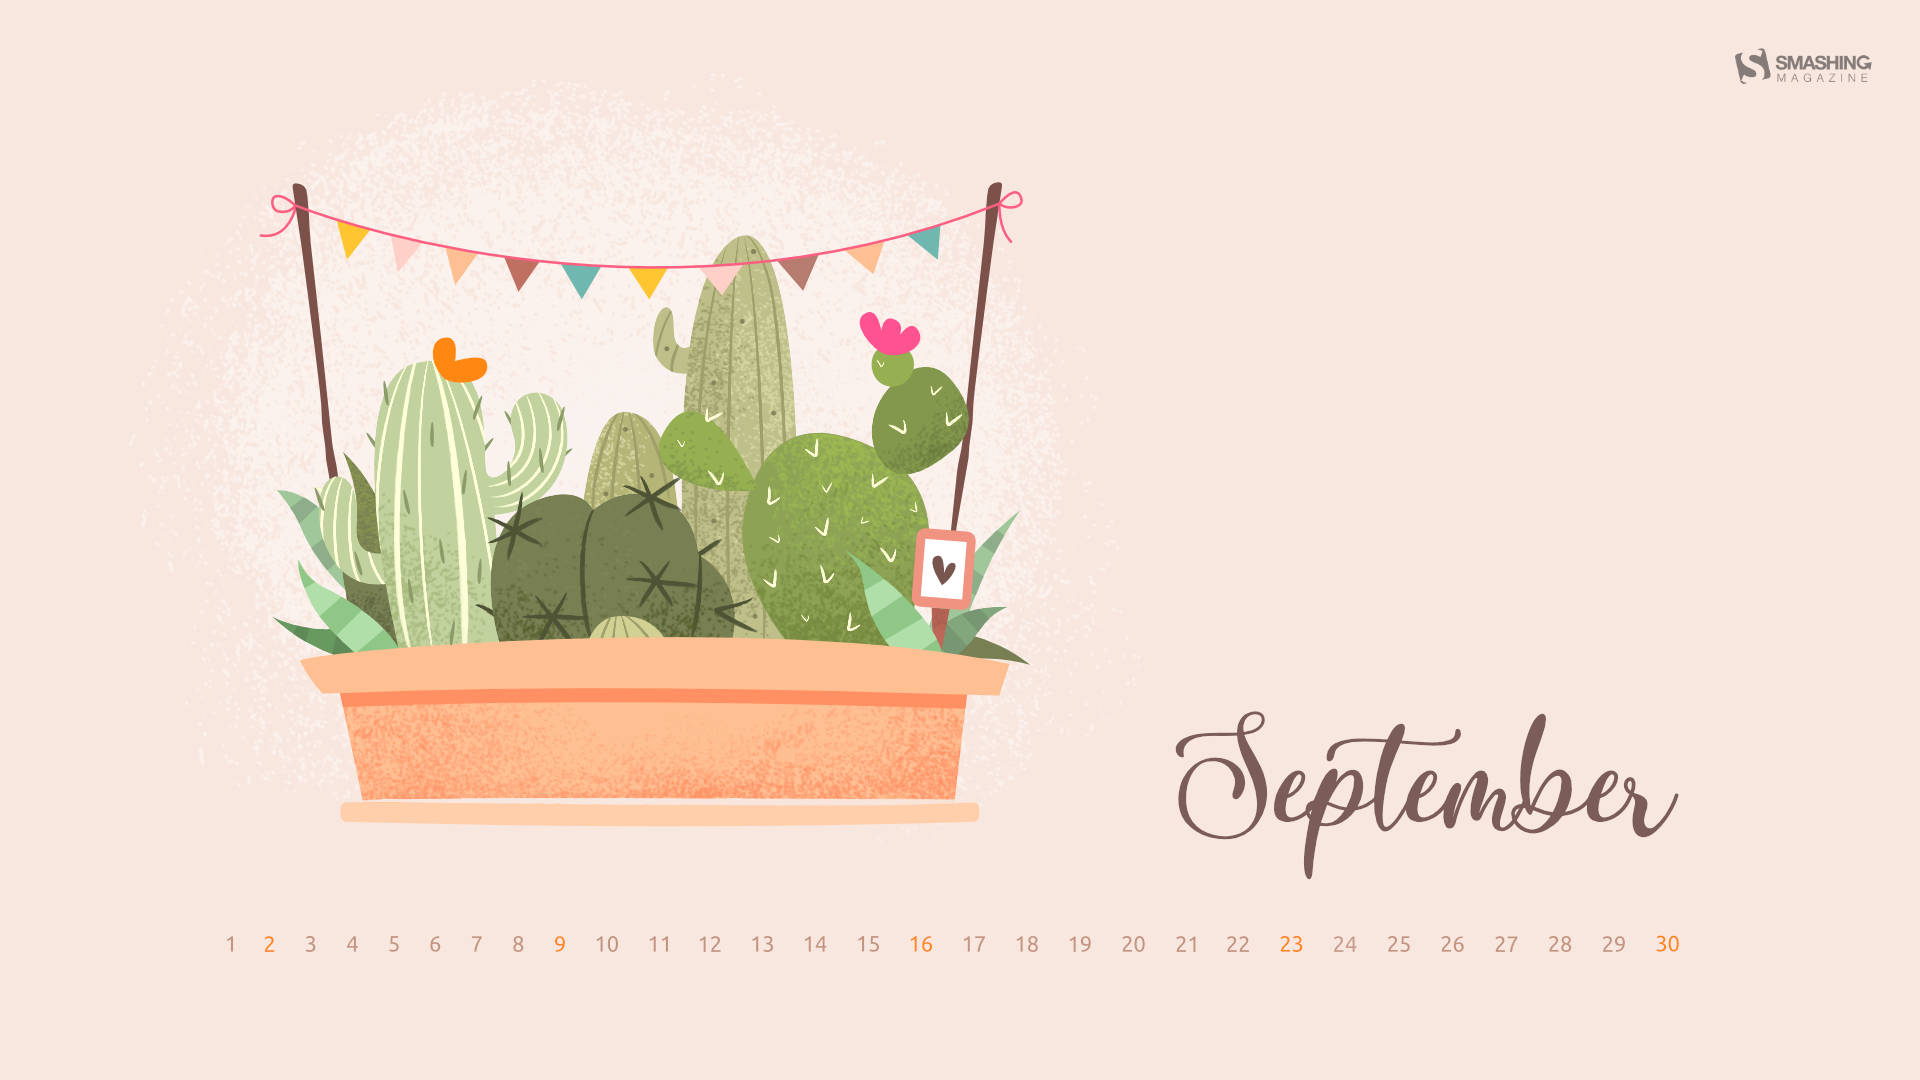 Make The Most Of September Calendar With This Cacti-inspired Design.